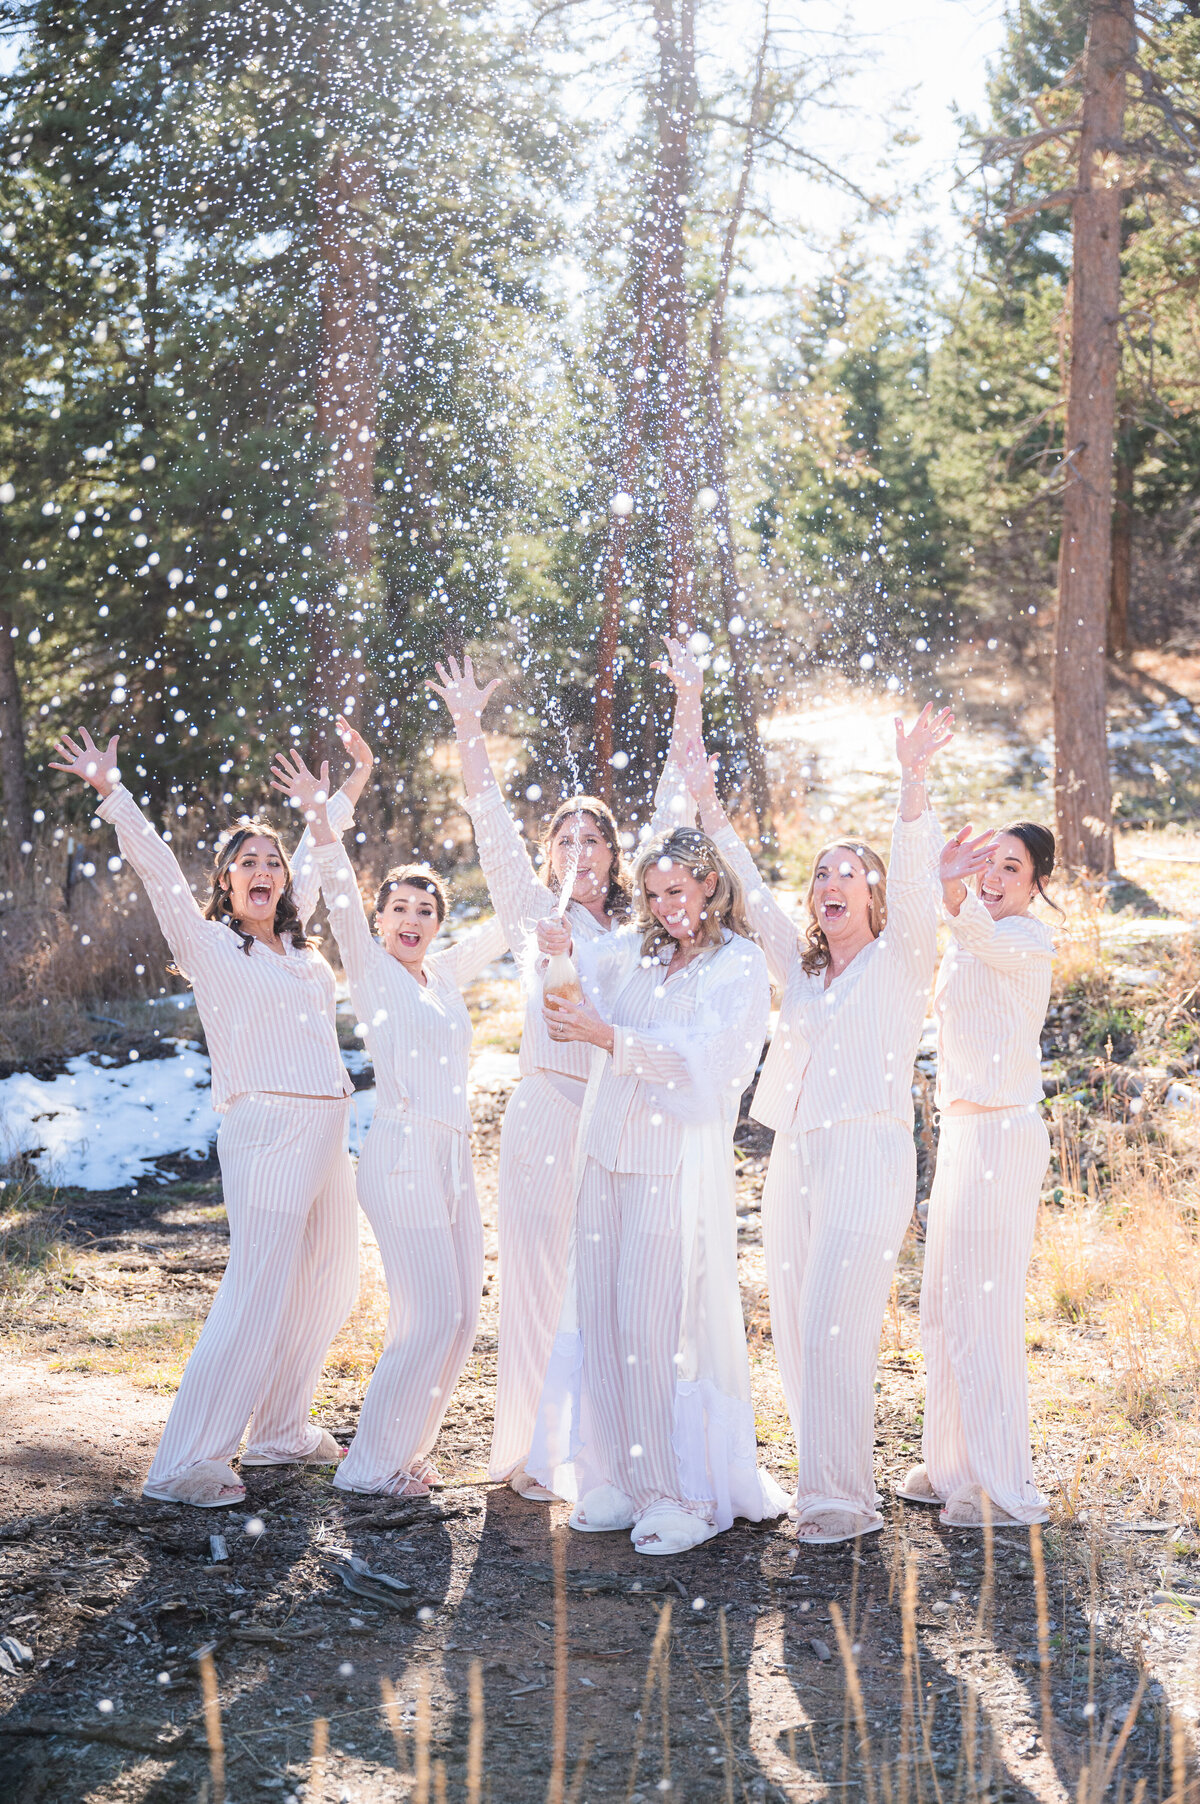 A bride and her bridesmaids pop a bottle of champagne and the bridesmaids all celebrate as bubbles go everywhere.